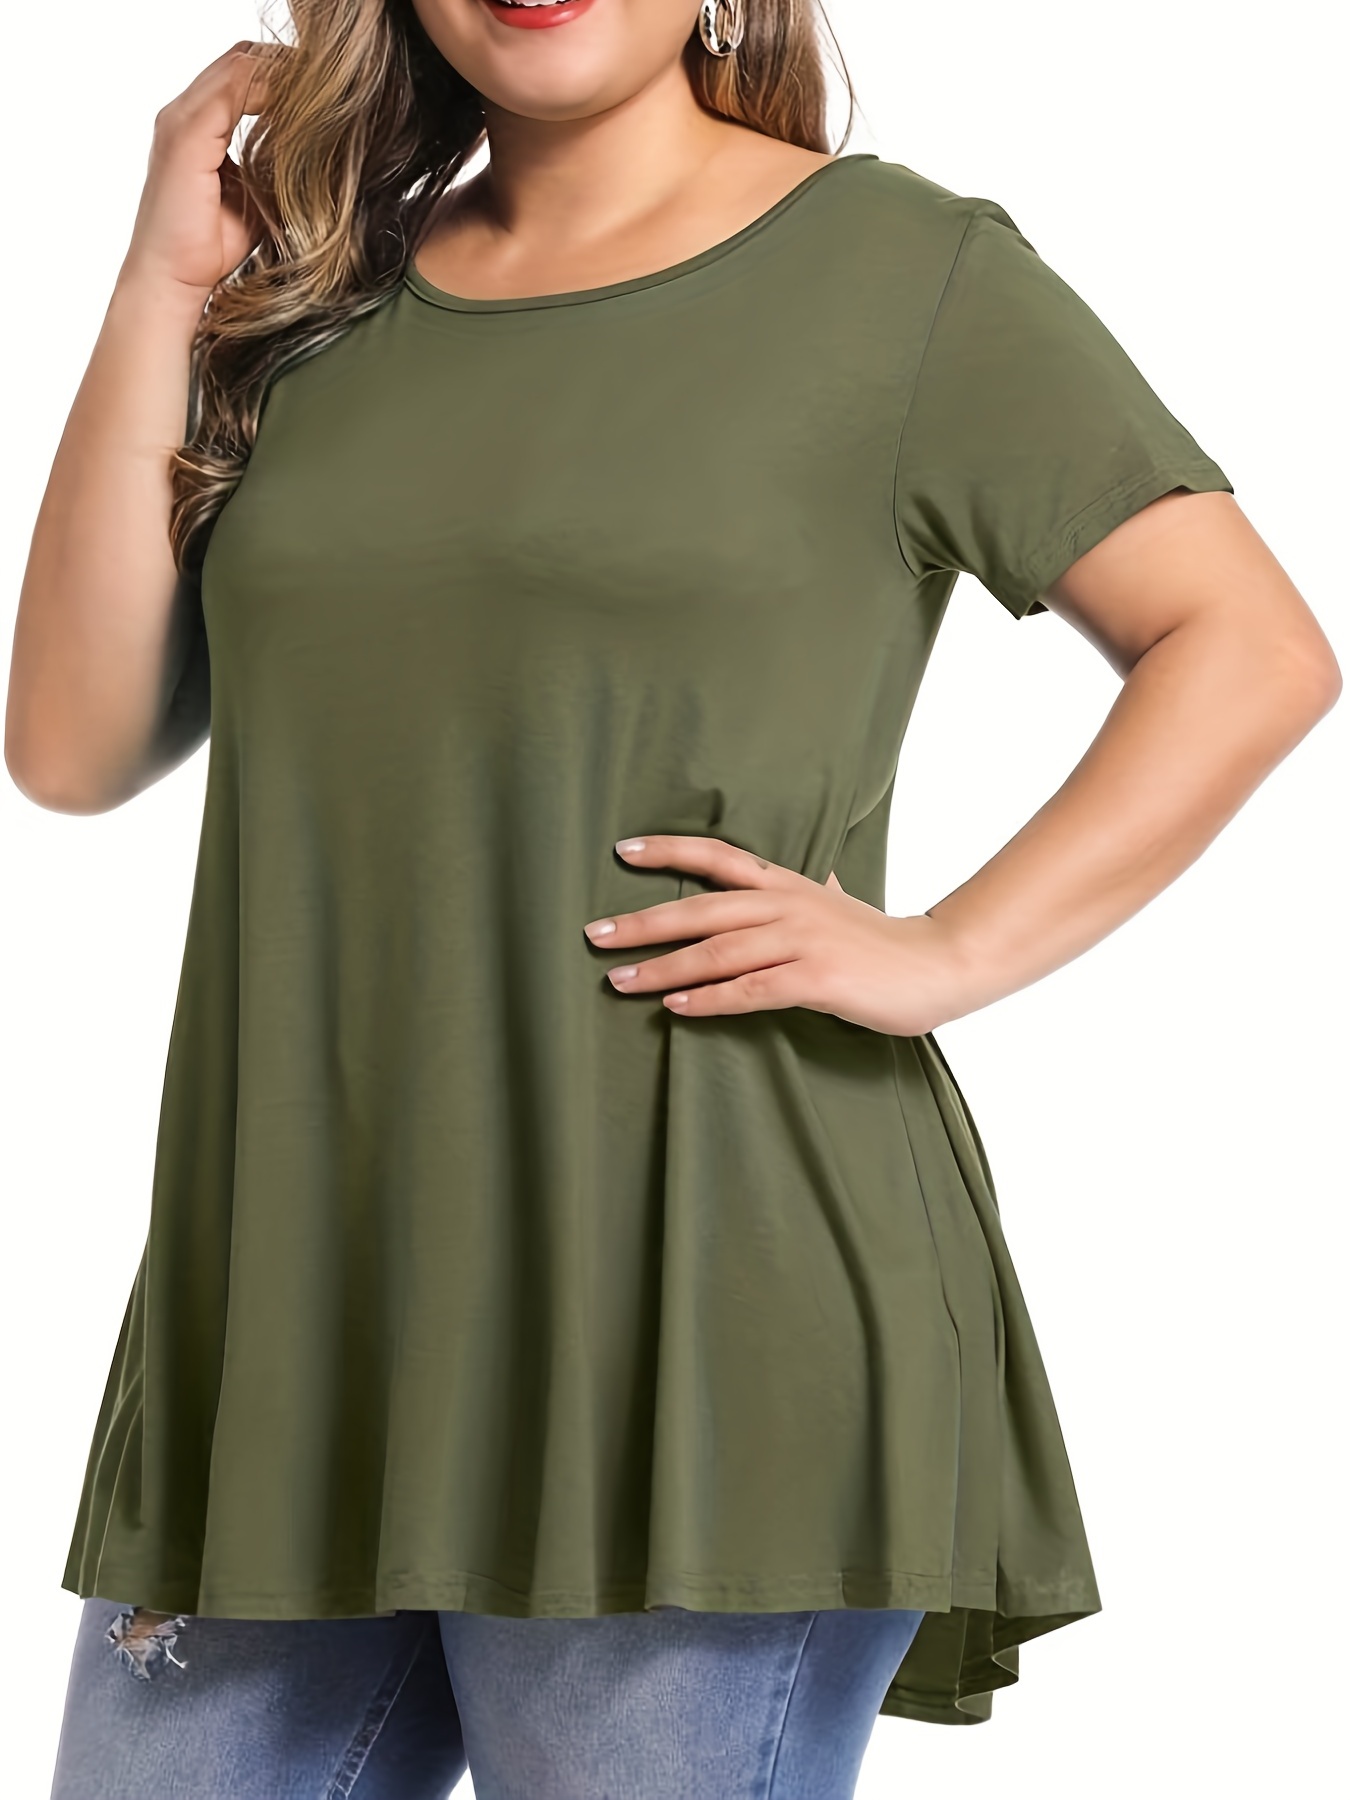 GMAYO Plus Size Clothing,Women Solid Simple Style Top 3/4 Sleeve